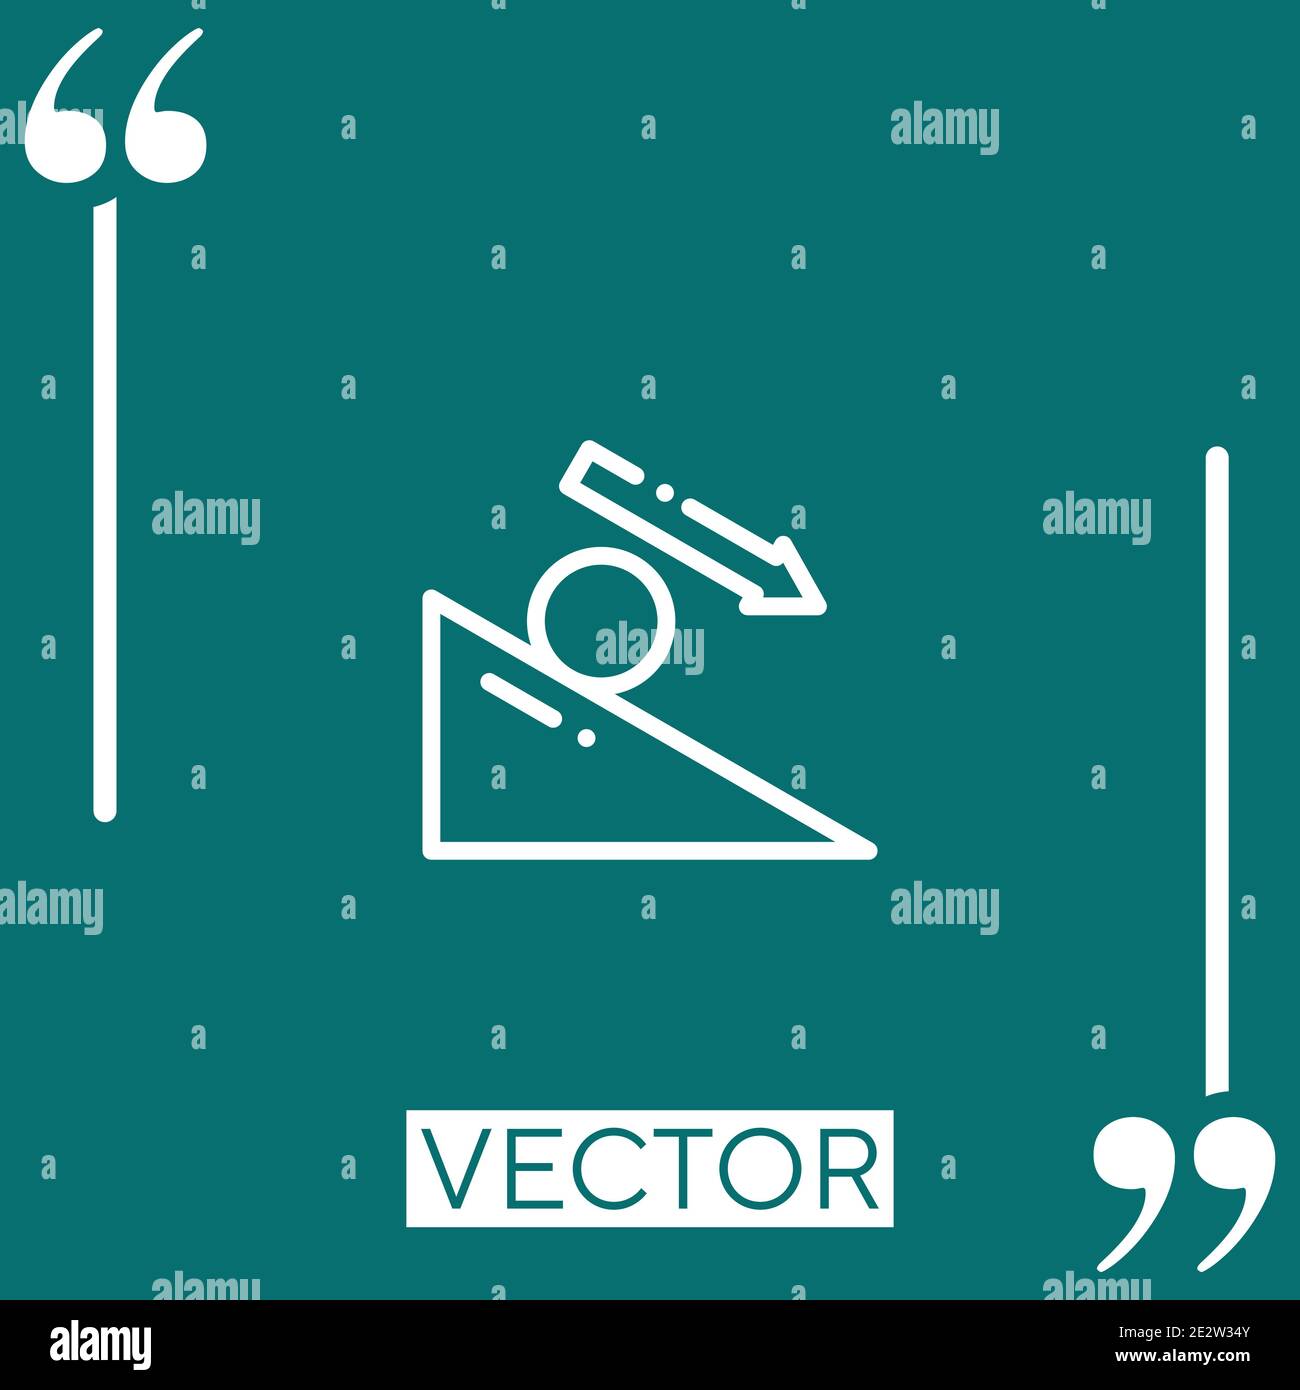 law of motion Linear icon. Editable stroke line Stock Vector